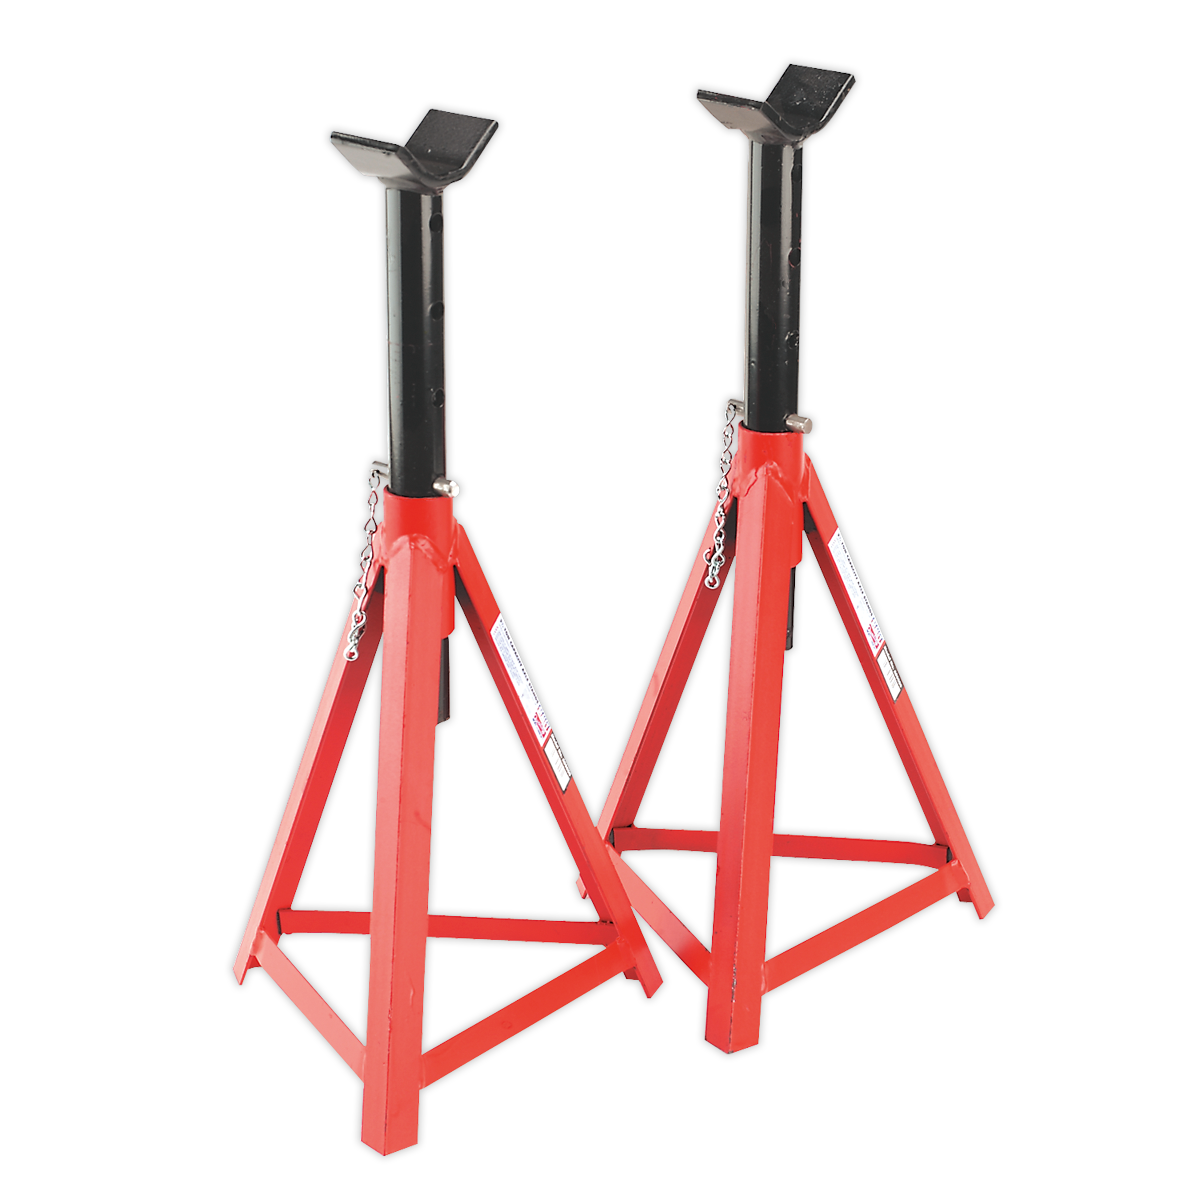 SEALEY - AS3000 Axle Stands (Pair) 2.5tonne Capacity per Stand Medium Height